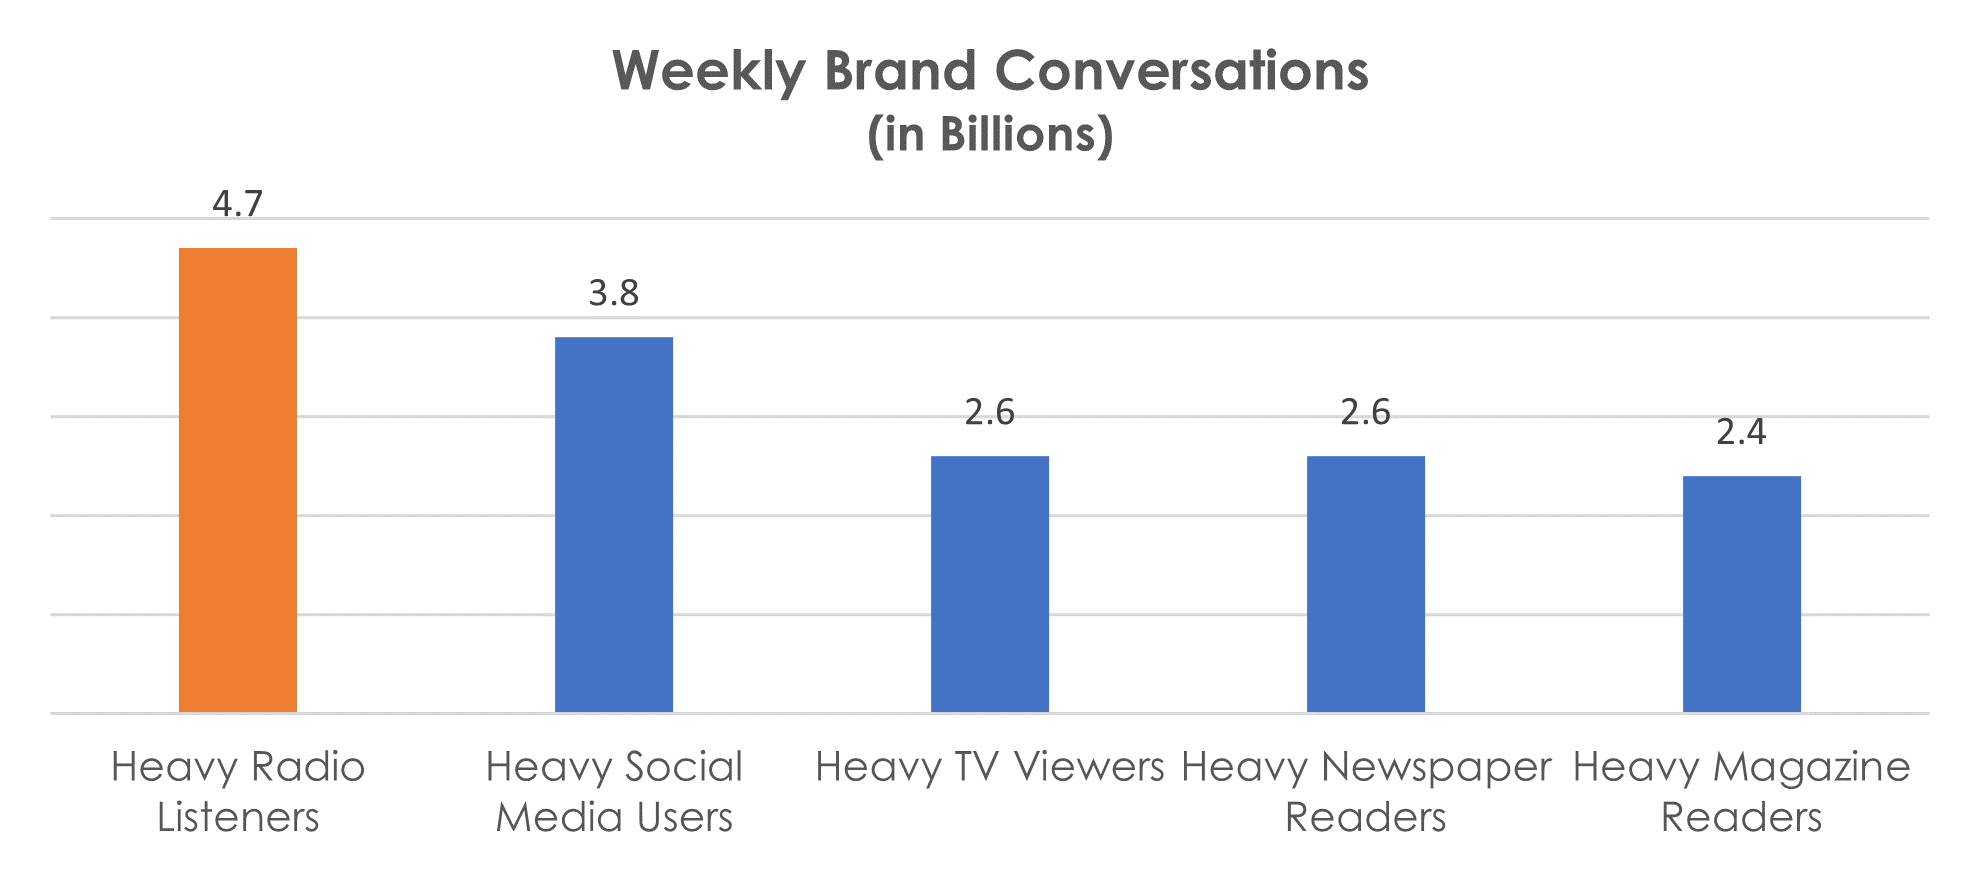 Weekly Brand Conversations - Source: Engagement Labs TotalSocial, August 2022 – July 2023